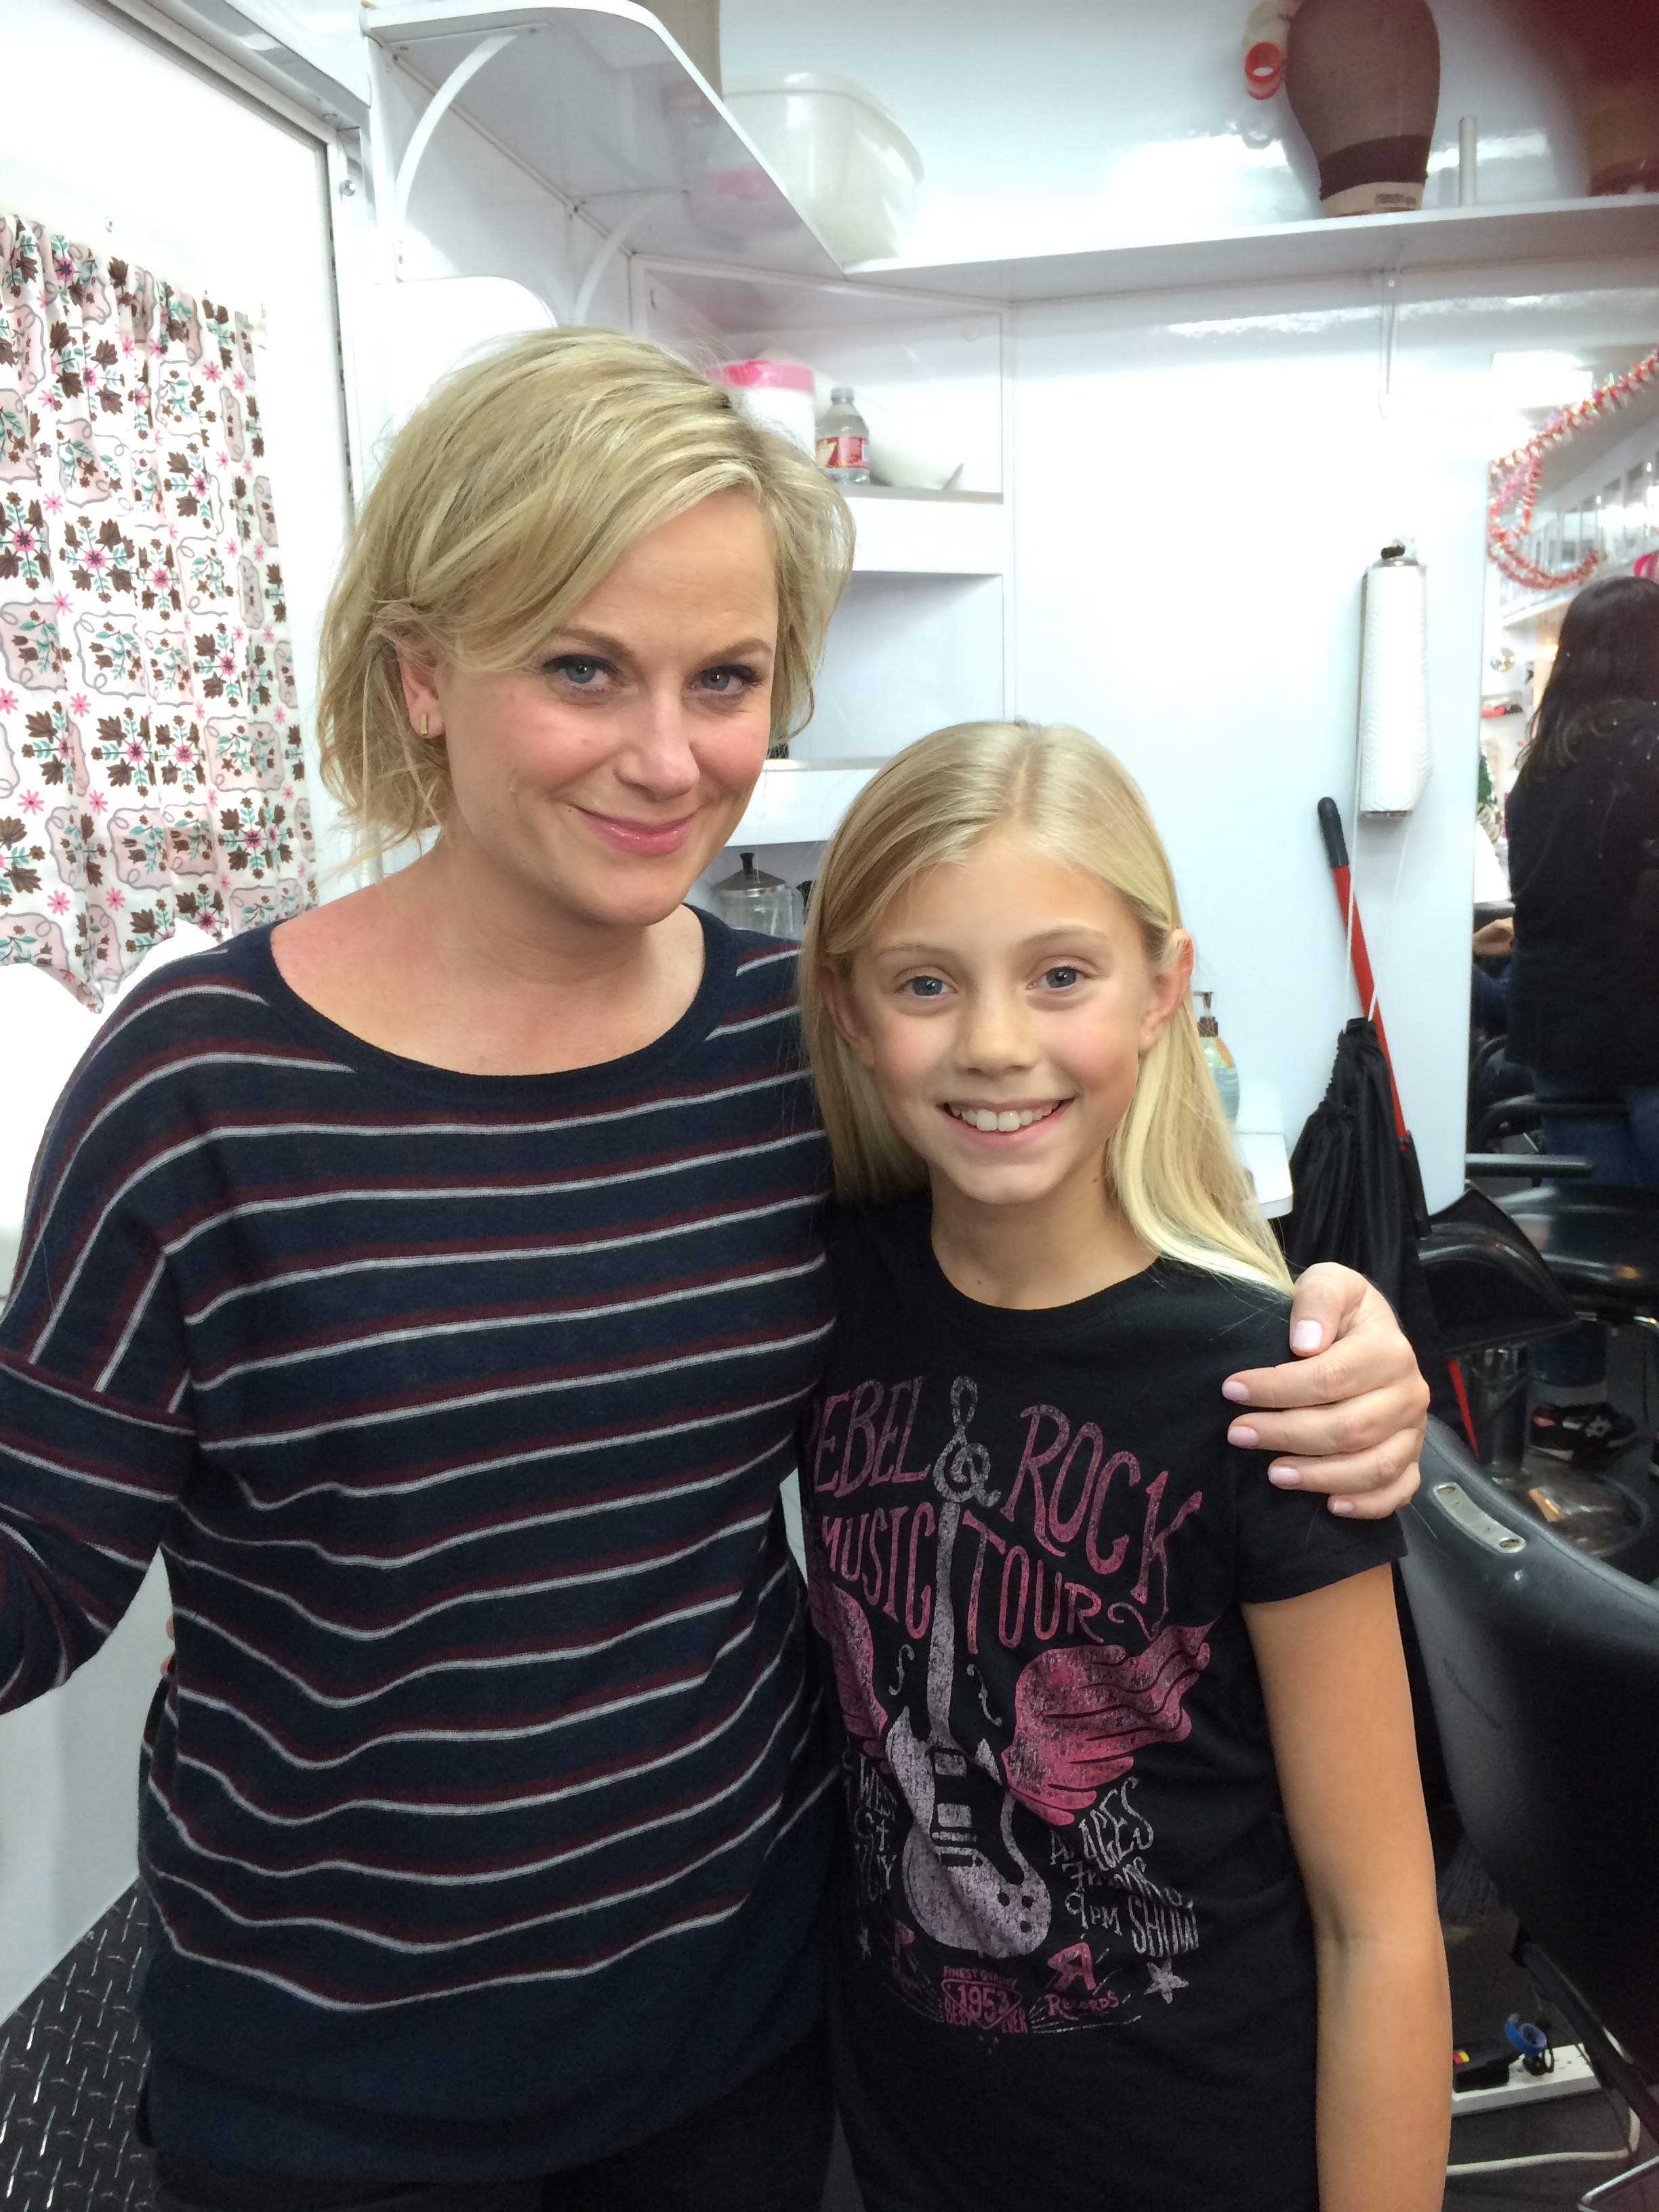 Amy Poehler and Chloe for Parks and Recreation Series Finale. Play Mom and Daughter.